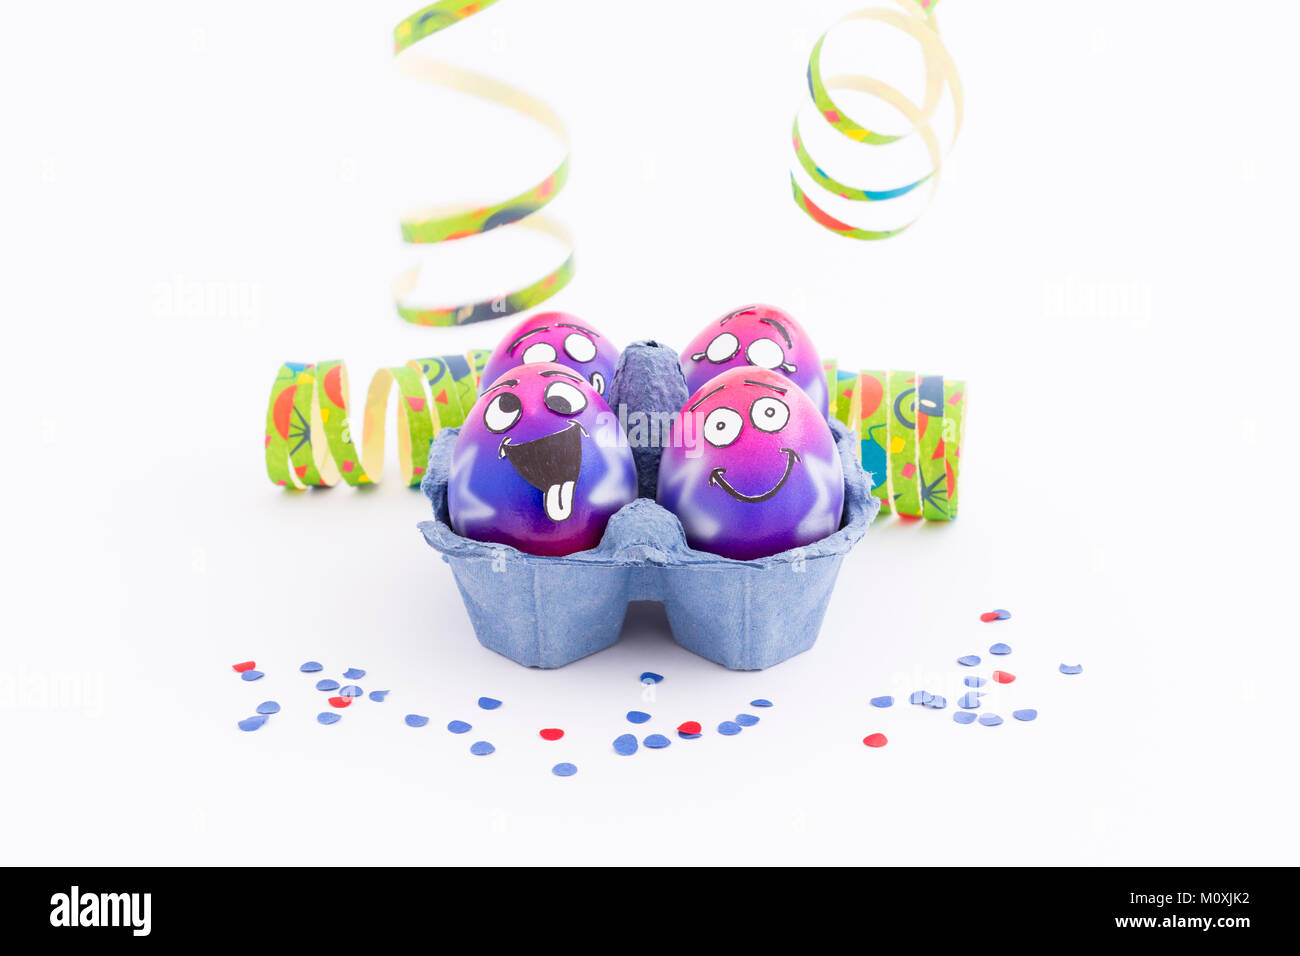 Group of colorful painted Easter eggs with funny cartoon style faces in a light blue egg box, colorful confetti and paper streamer on white background Stock Photo